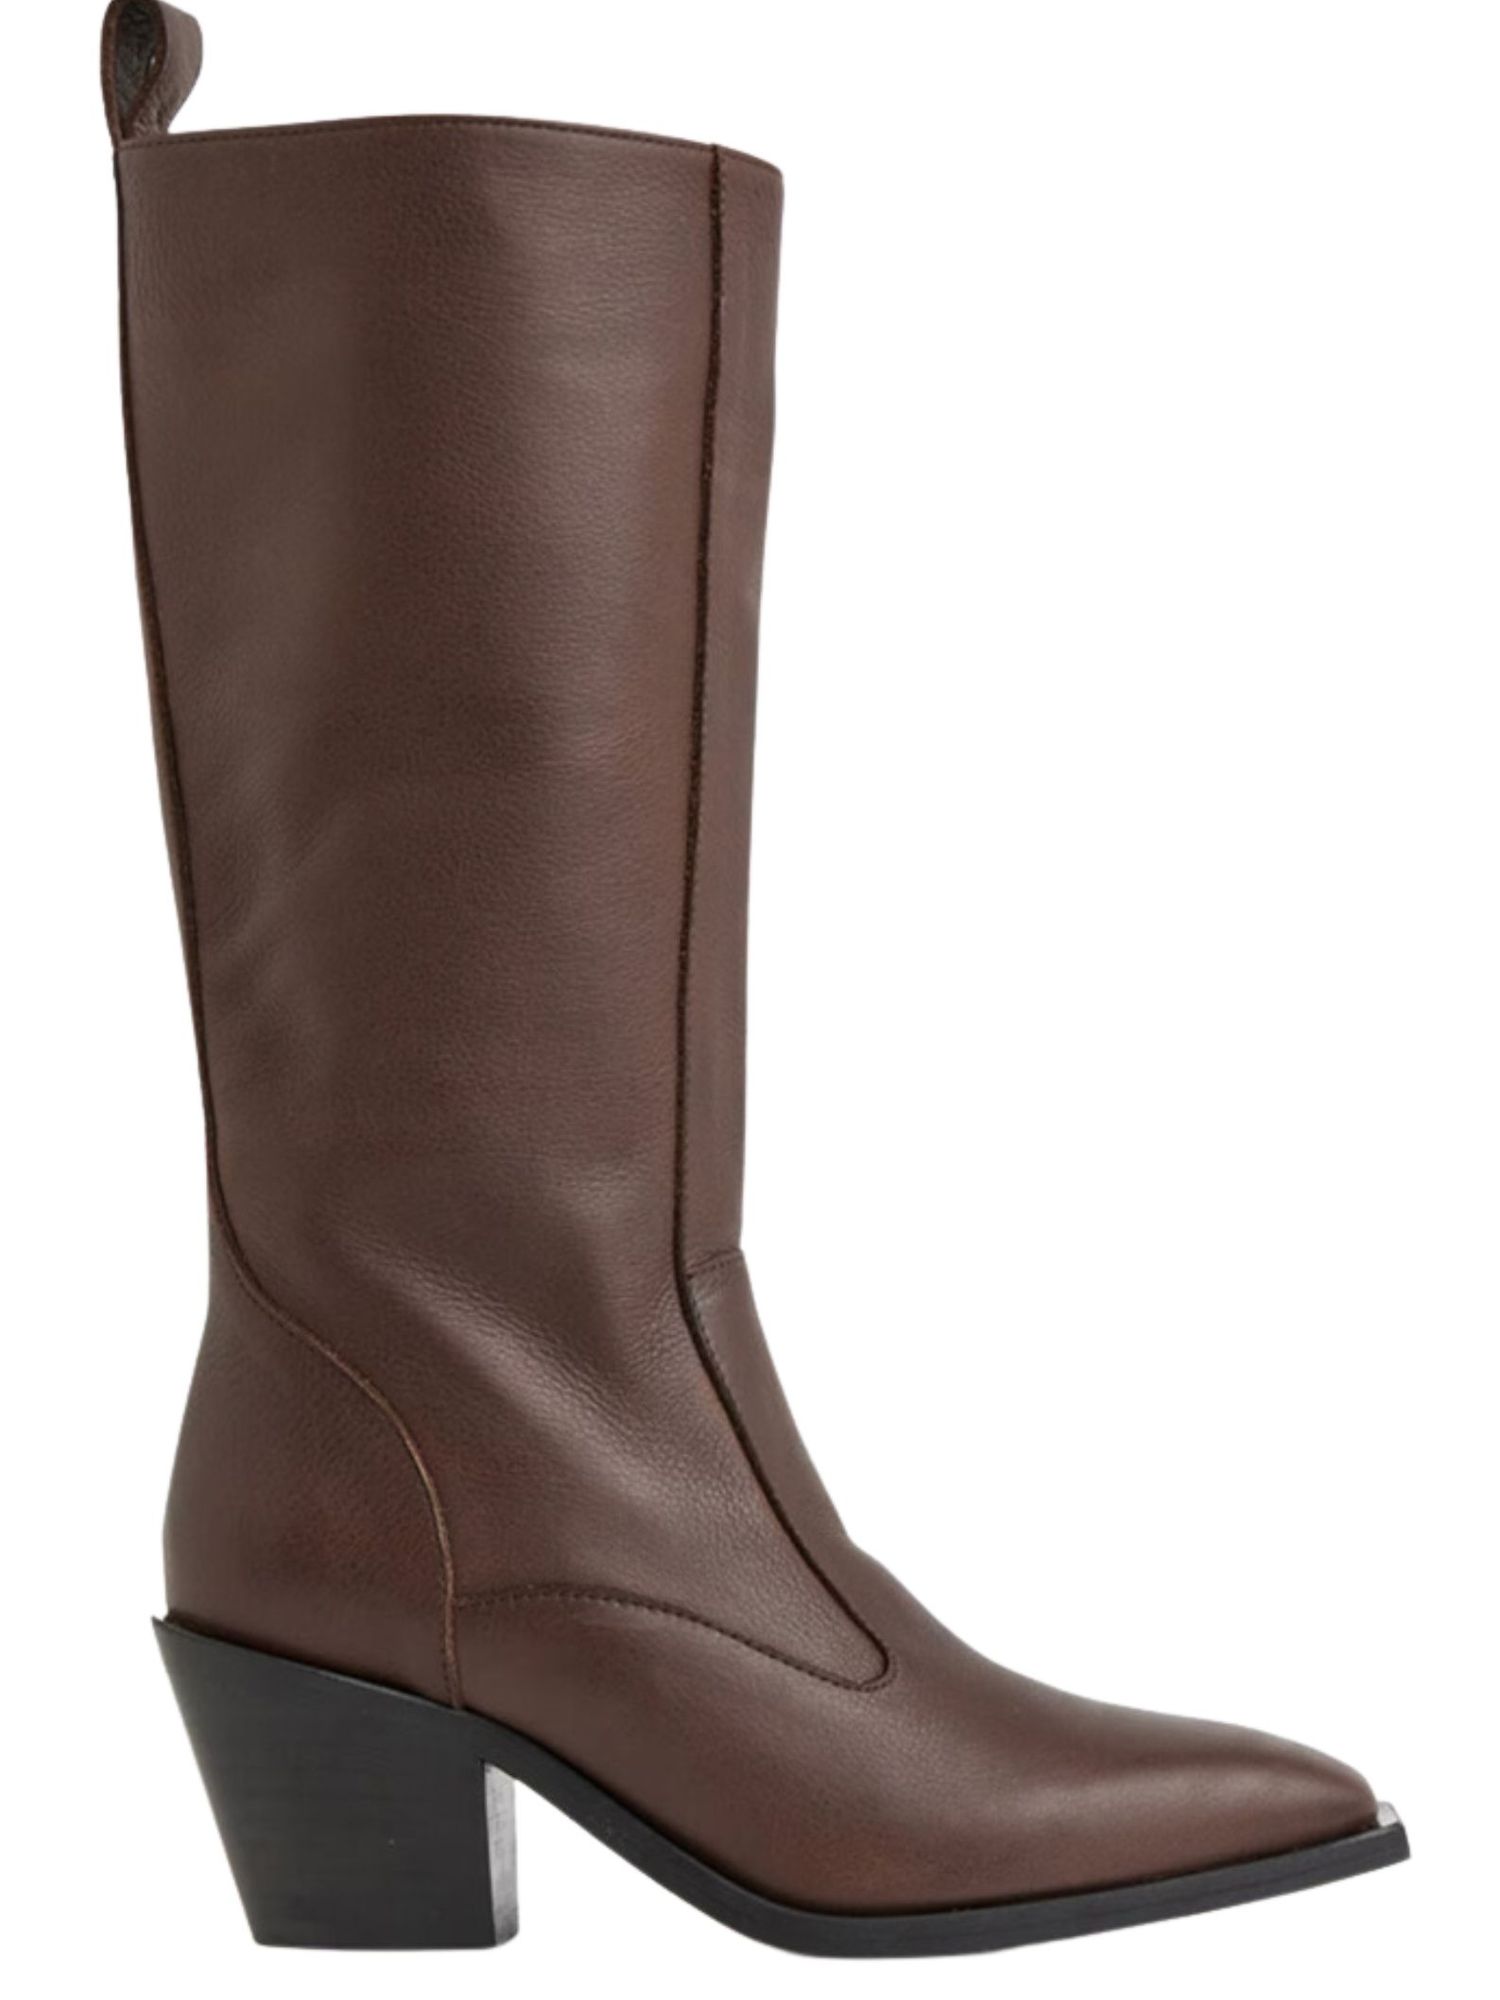 The 20 best knee-high boots to invest in this autumn - Vogue Scandinavia